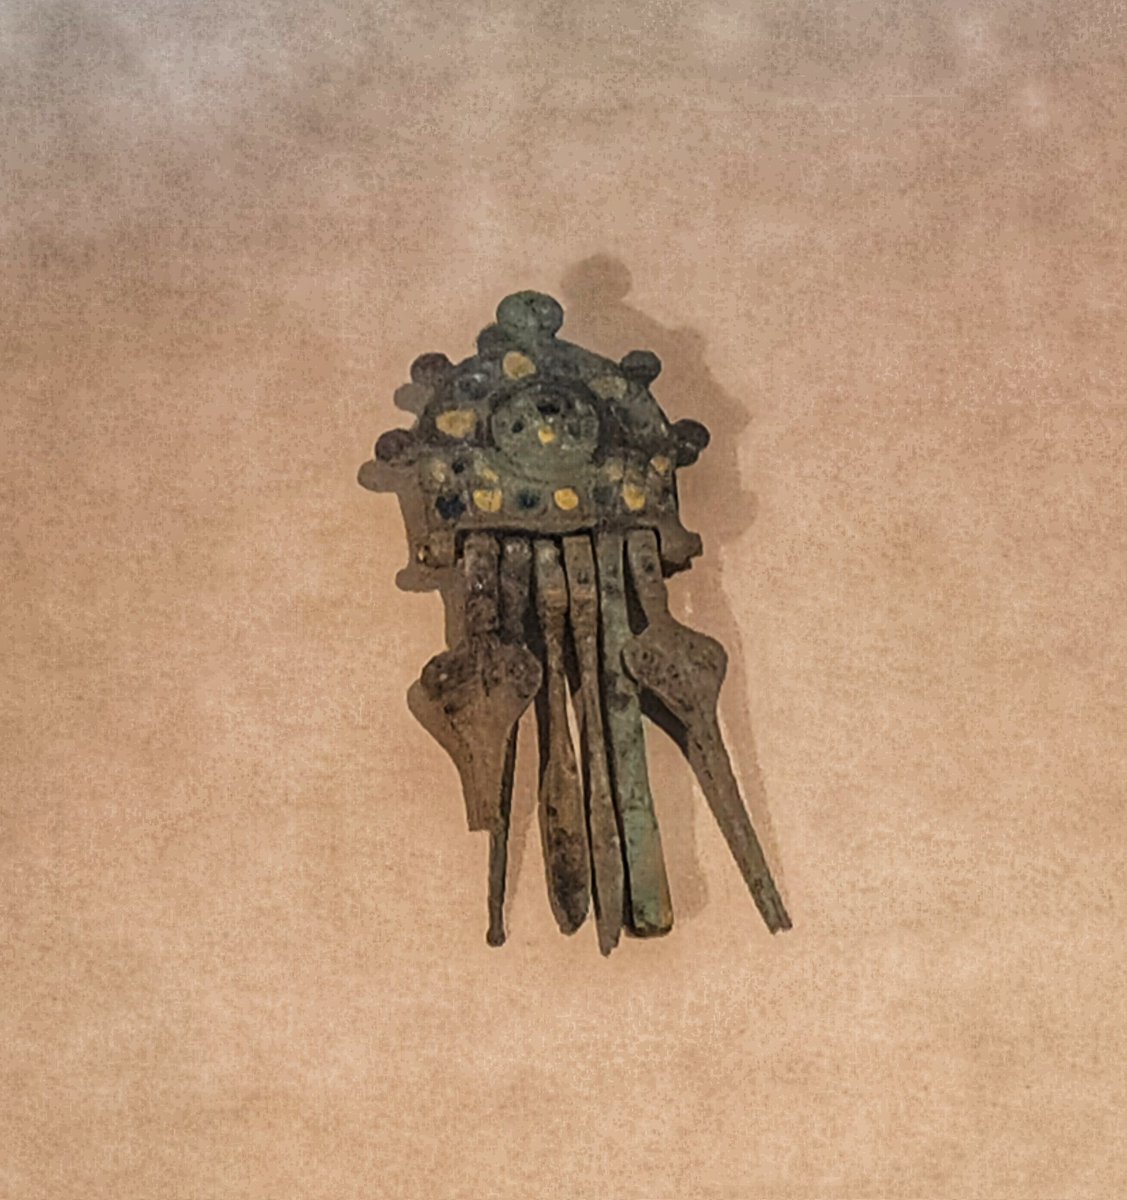 Welcome to episode 2 of our Roman army miniseries! 🗡️

Tent flaps, citizenship diplomas & tweezers disguised as a brooch...

📸 Us at the @britishmuseum exhibition 'Legion: life in the Roman army'.

#romanarmy #militaryhistory #classicstwitter #ancientrome #imperialrome #sensory